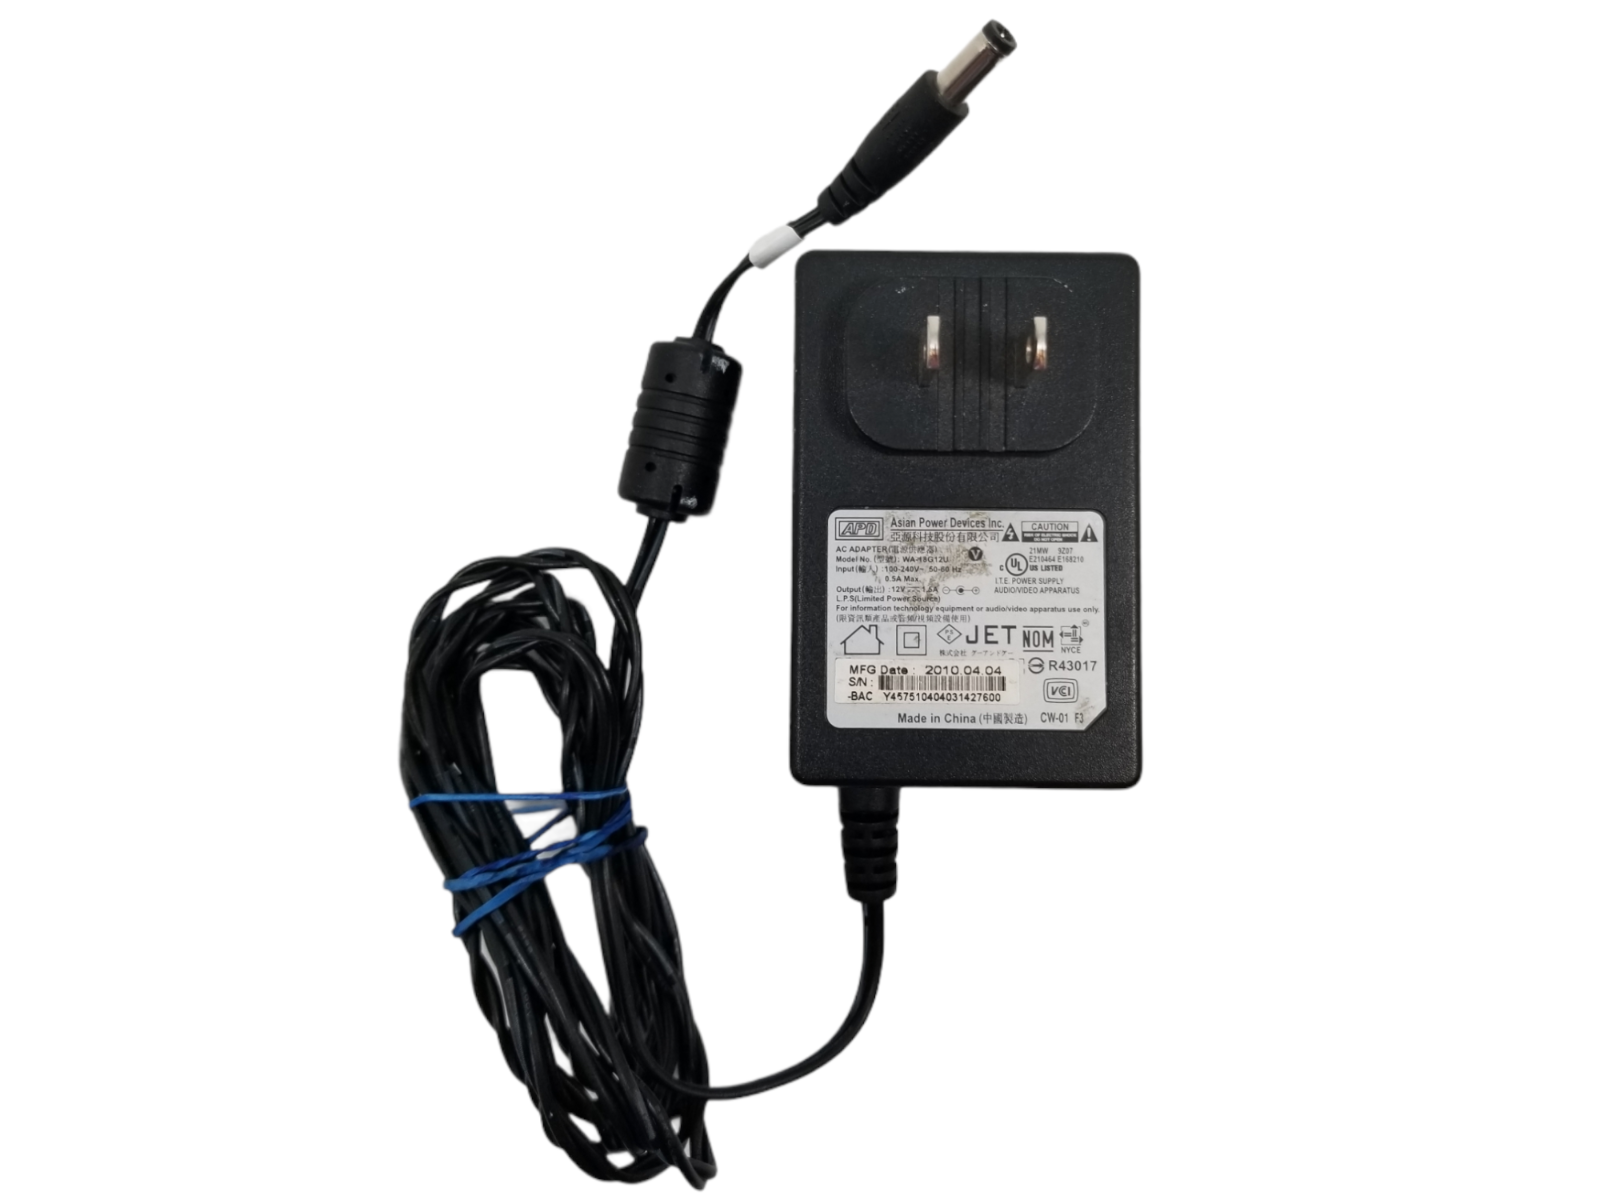 ADP WA-18G12U US AC Adapter 12V 1.5A replacement for Ktec KSAS0241200150HU Country/Region of Manufacture: United State